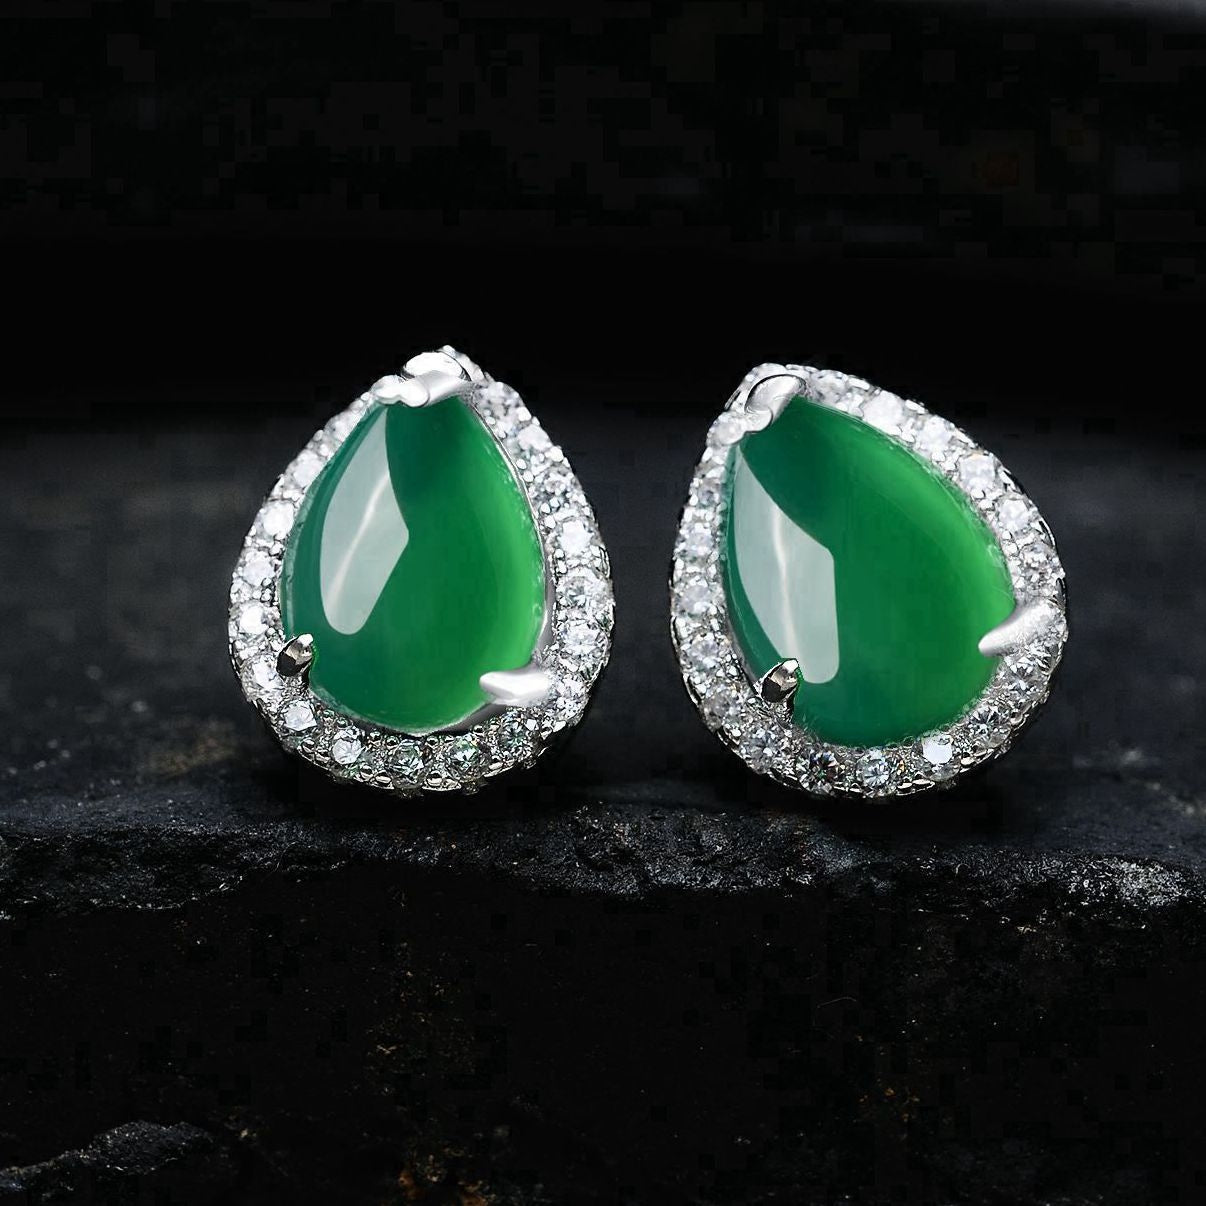 sterling silver stud earrings for women, with charming green agate stones